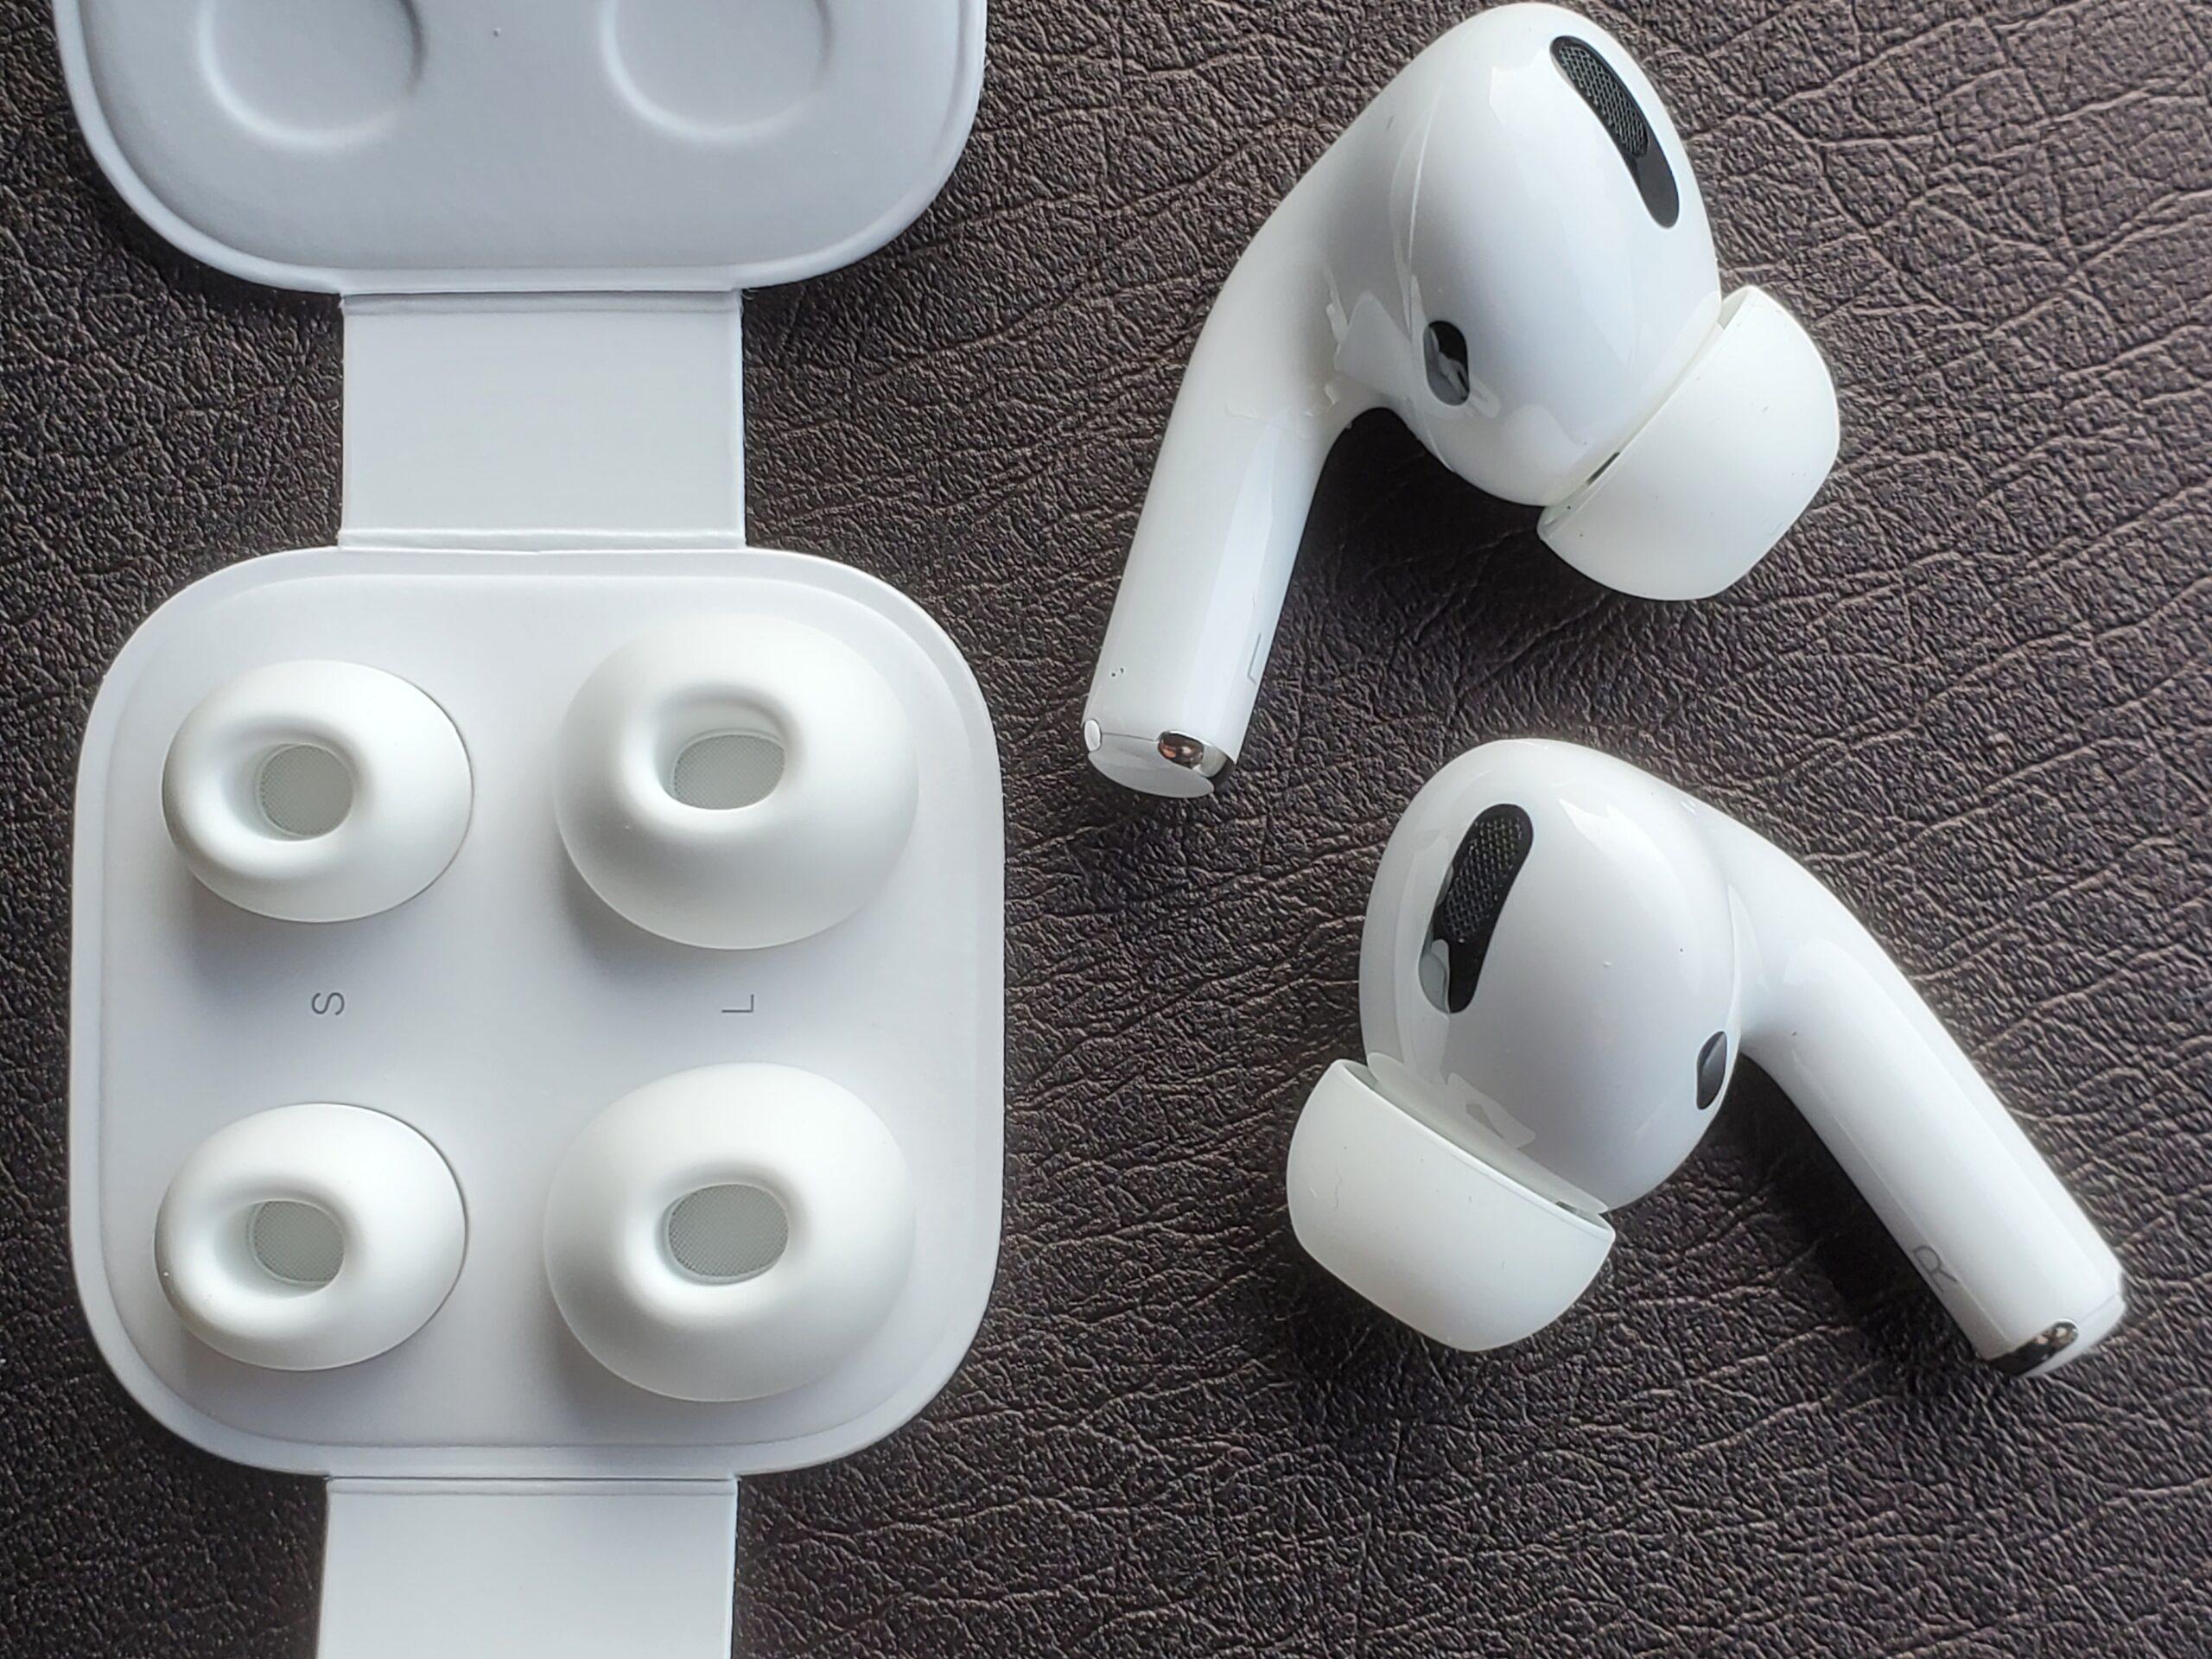 Apple AirPods Pro are some of the best True Wireless IEMs, and this is the case whether or not you are an iOS device user. On sale for under $200, they are the AirPods to get. AirPods Pro c7d517df apple airpods pro scaled